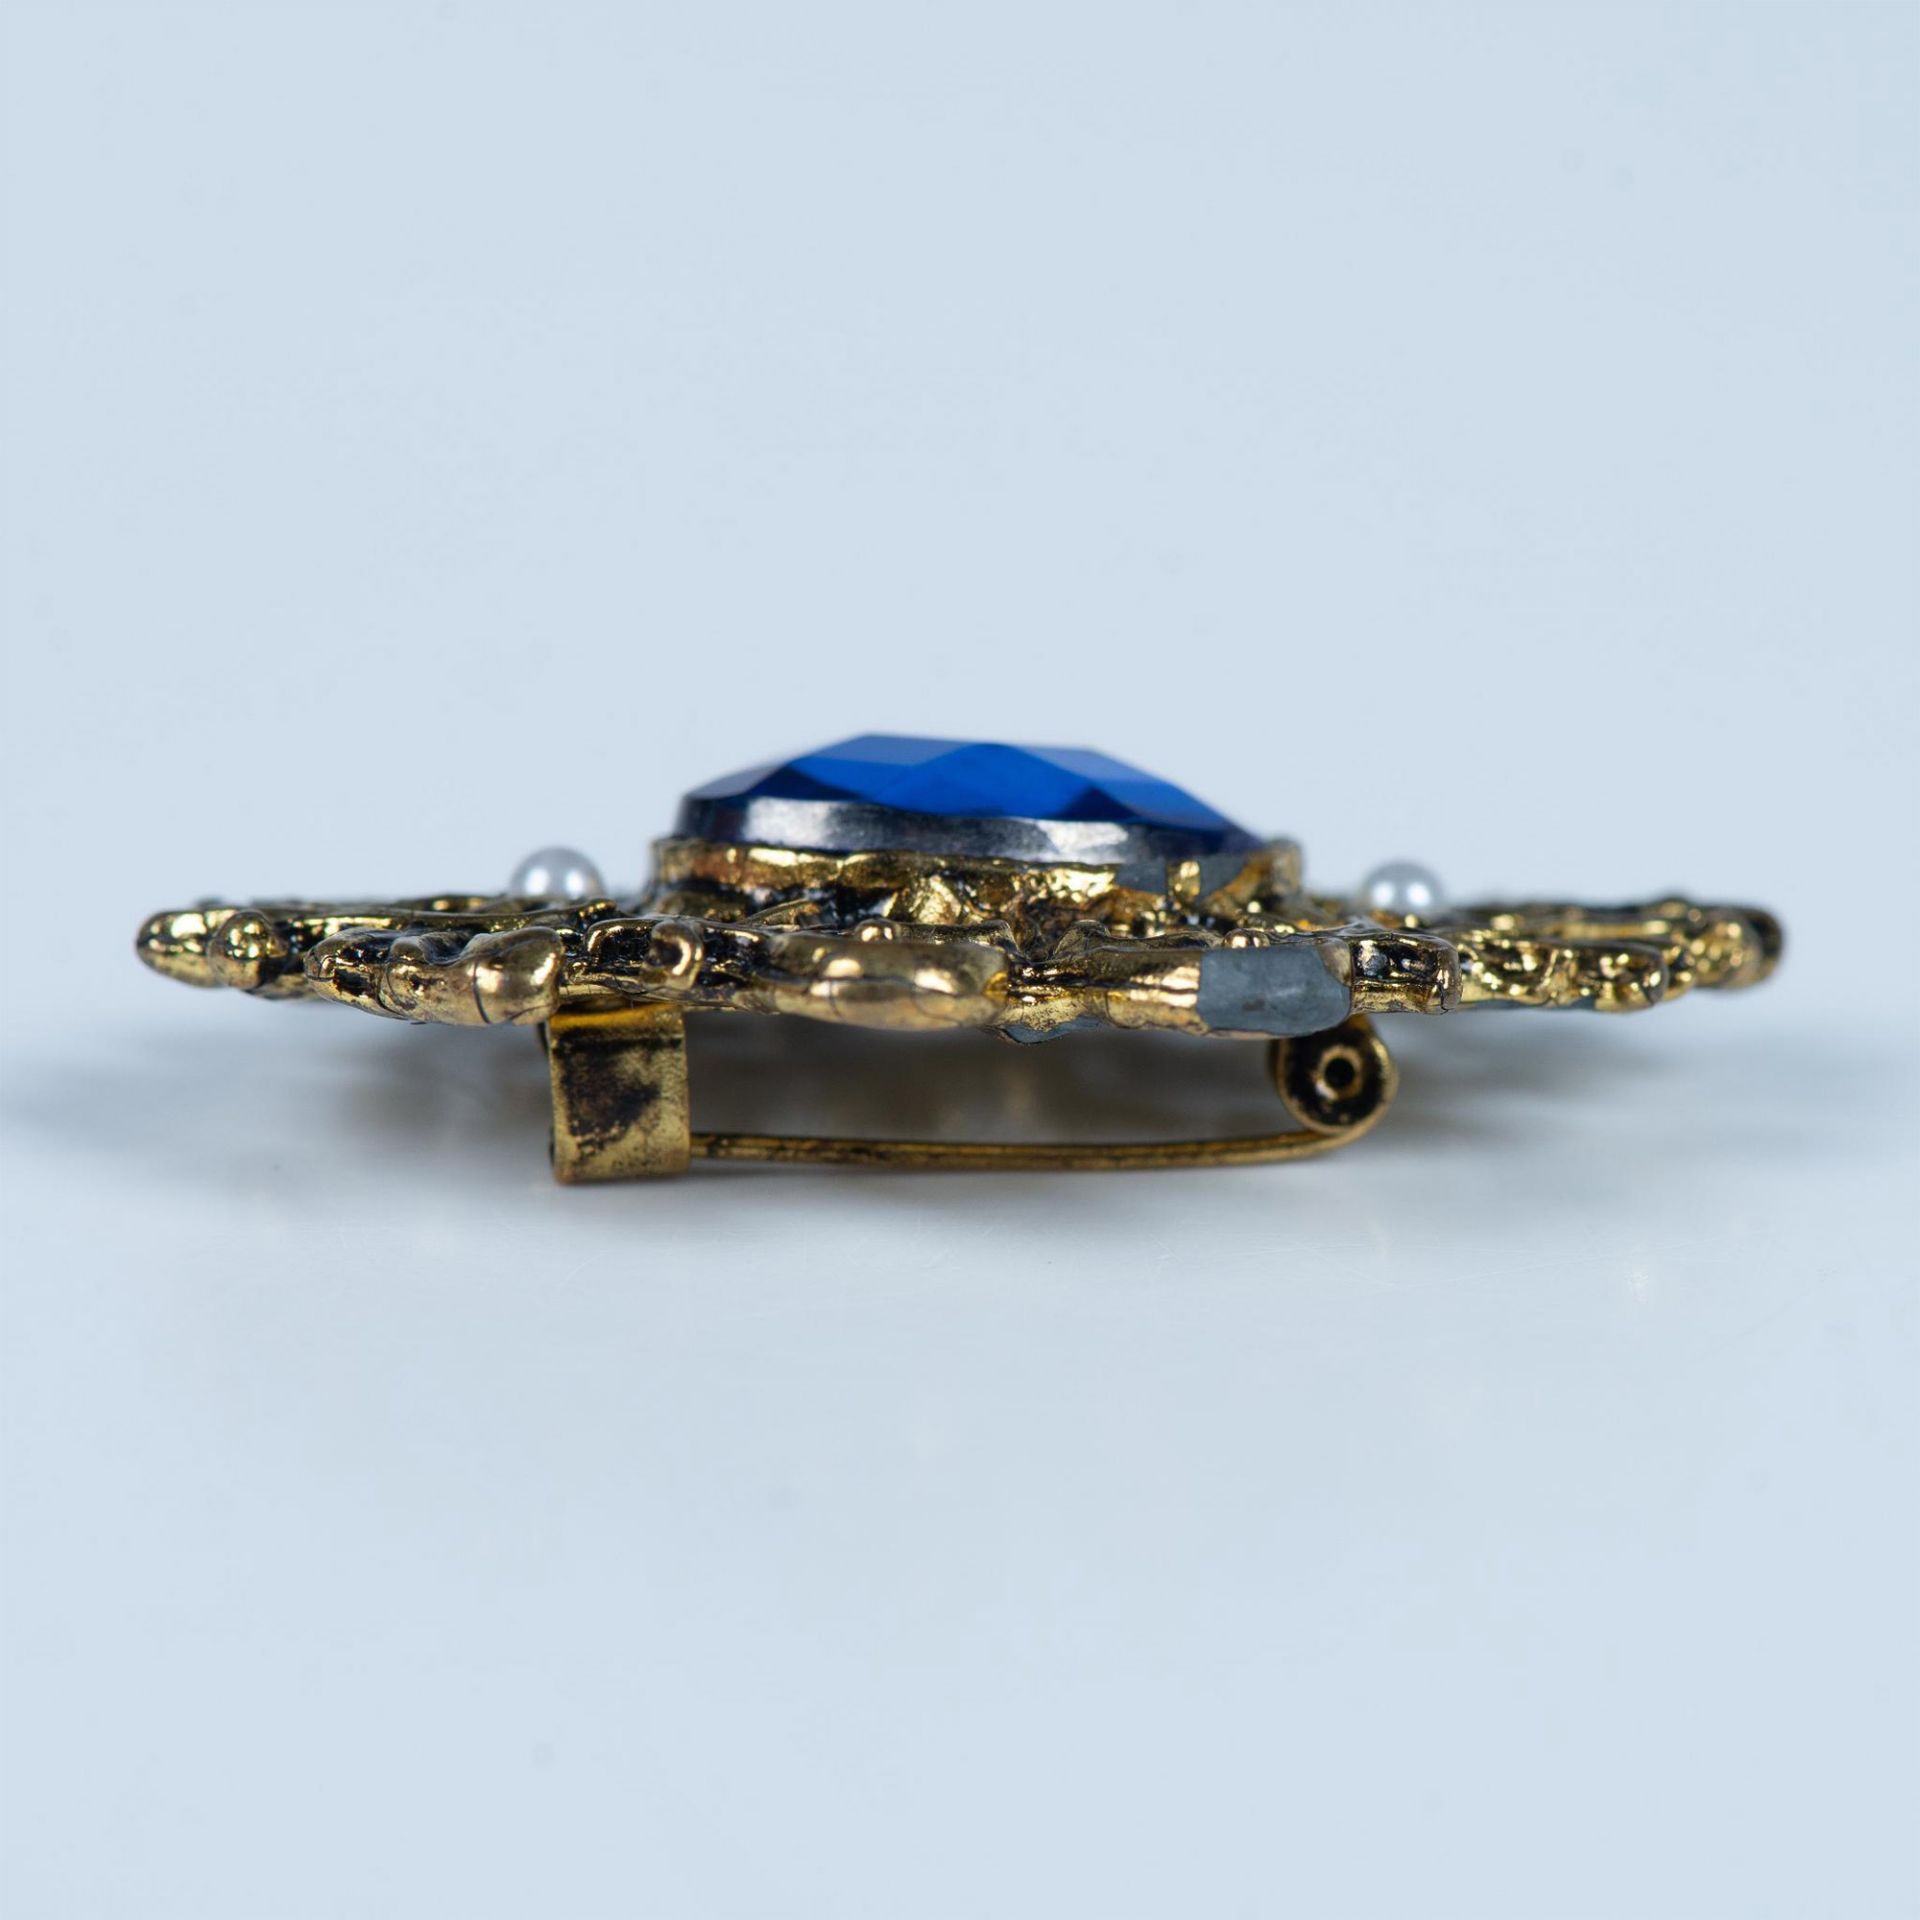 Ornate Gold Metal, Faux Pearl and Blue Rhinestone Brooch - Image 5 of 5